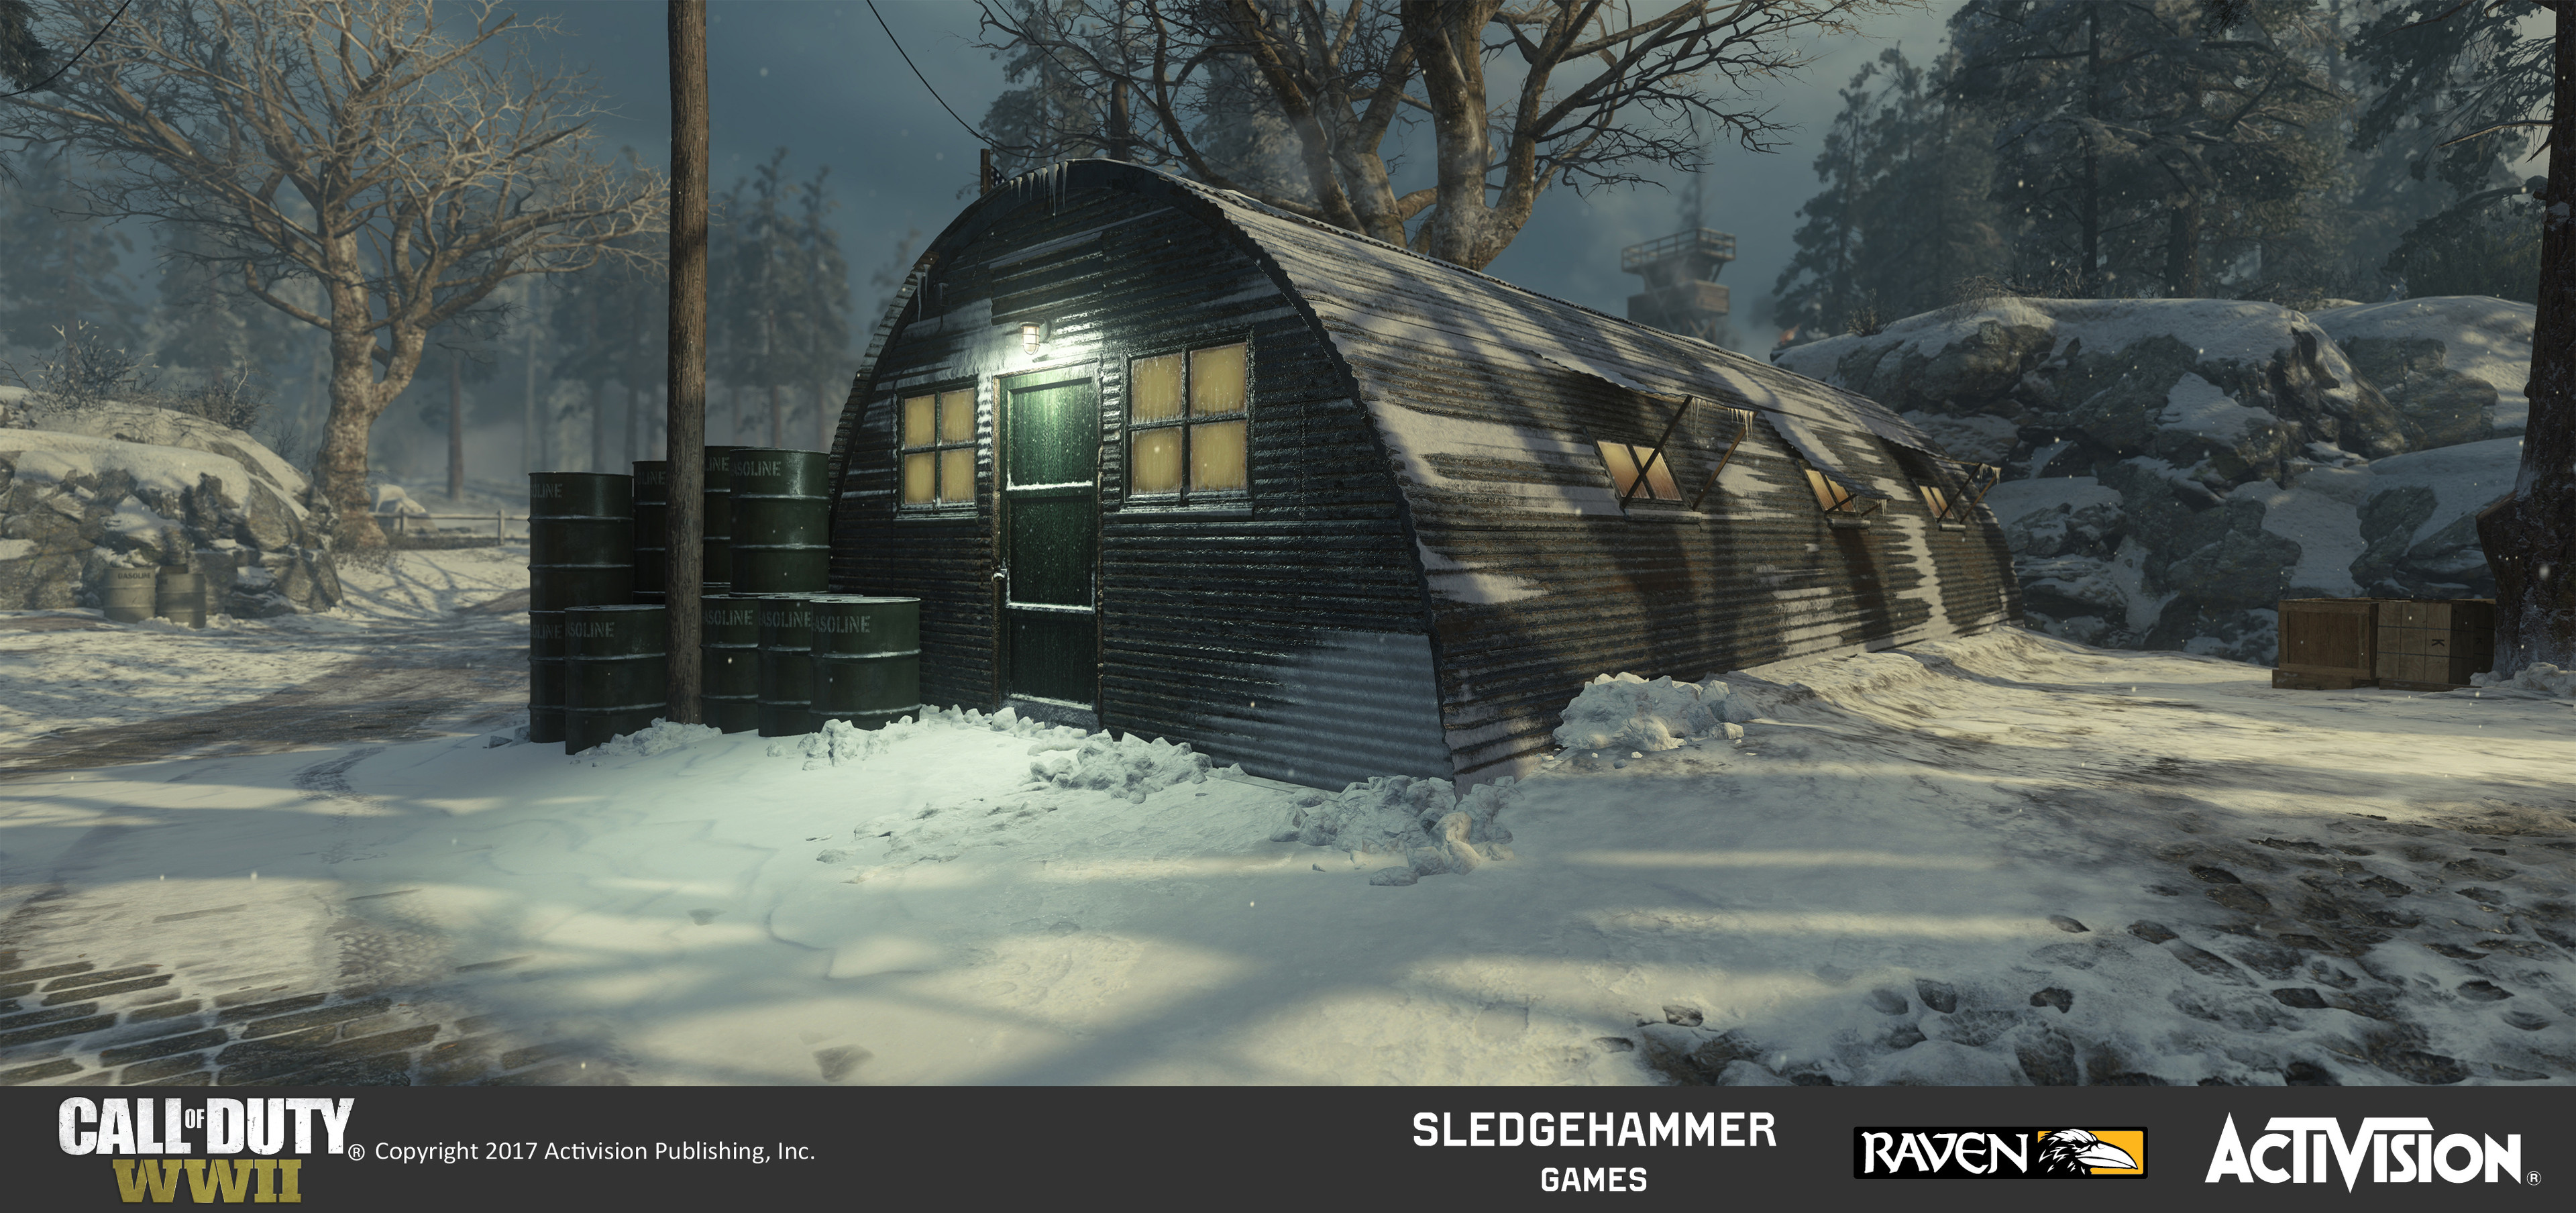 Quonset huts: Finished model of Quonset hut model in map after creating and painting its materials in Substance painter. Also responsible for terrain work in entire area around it.